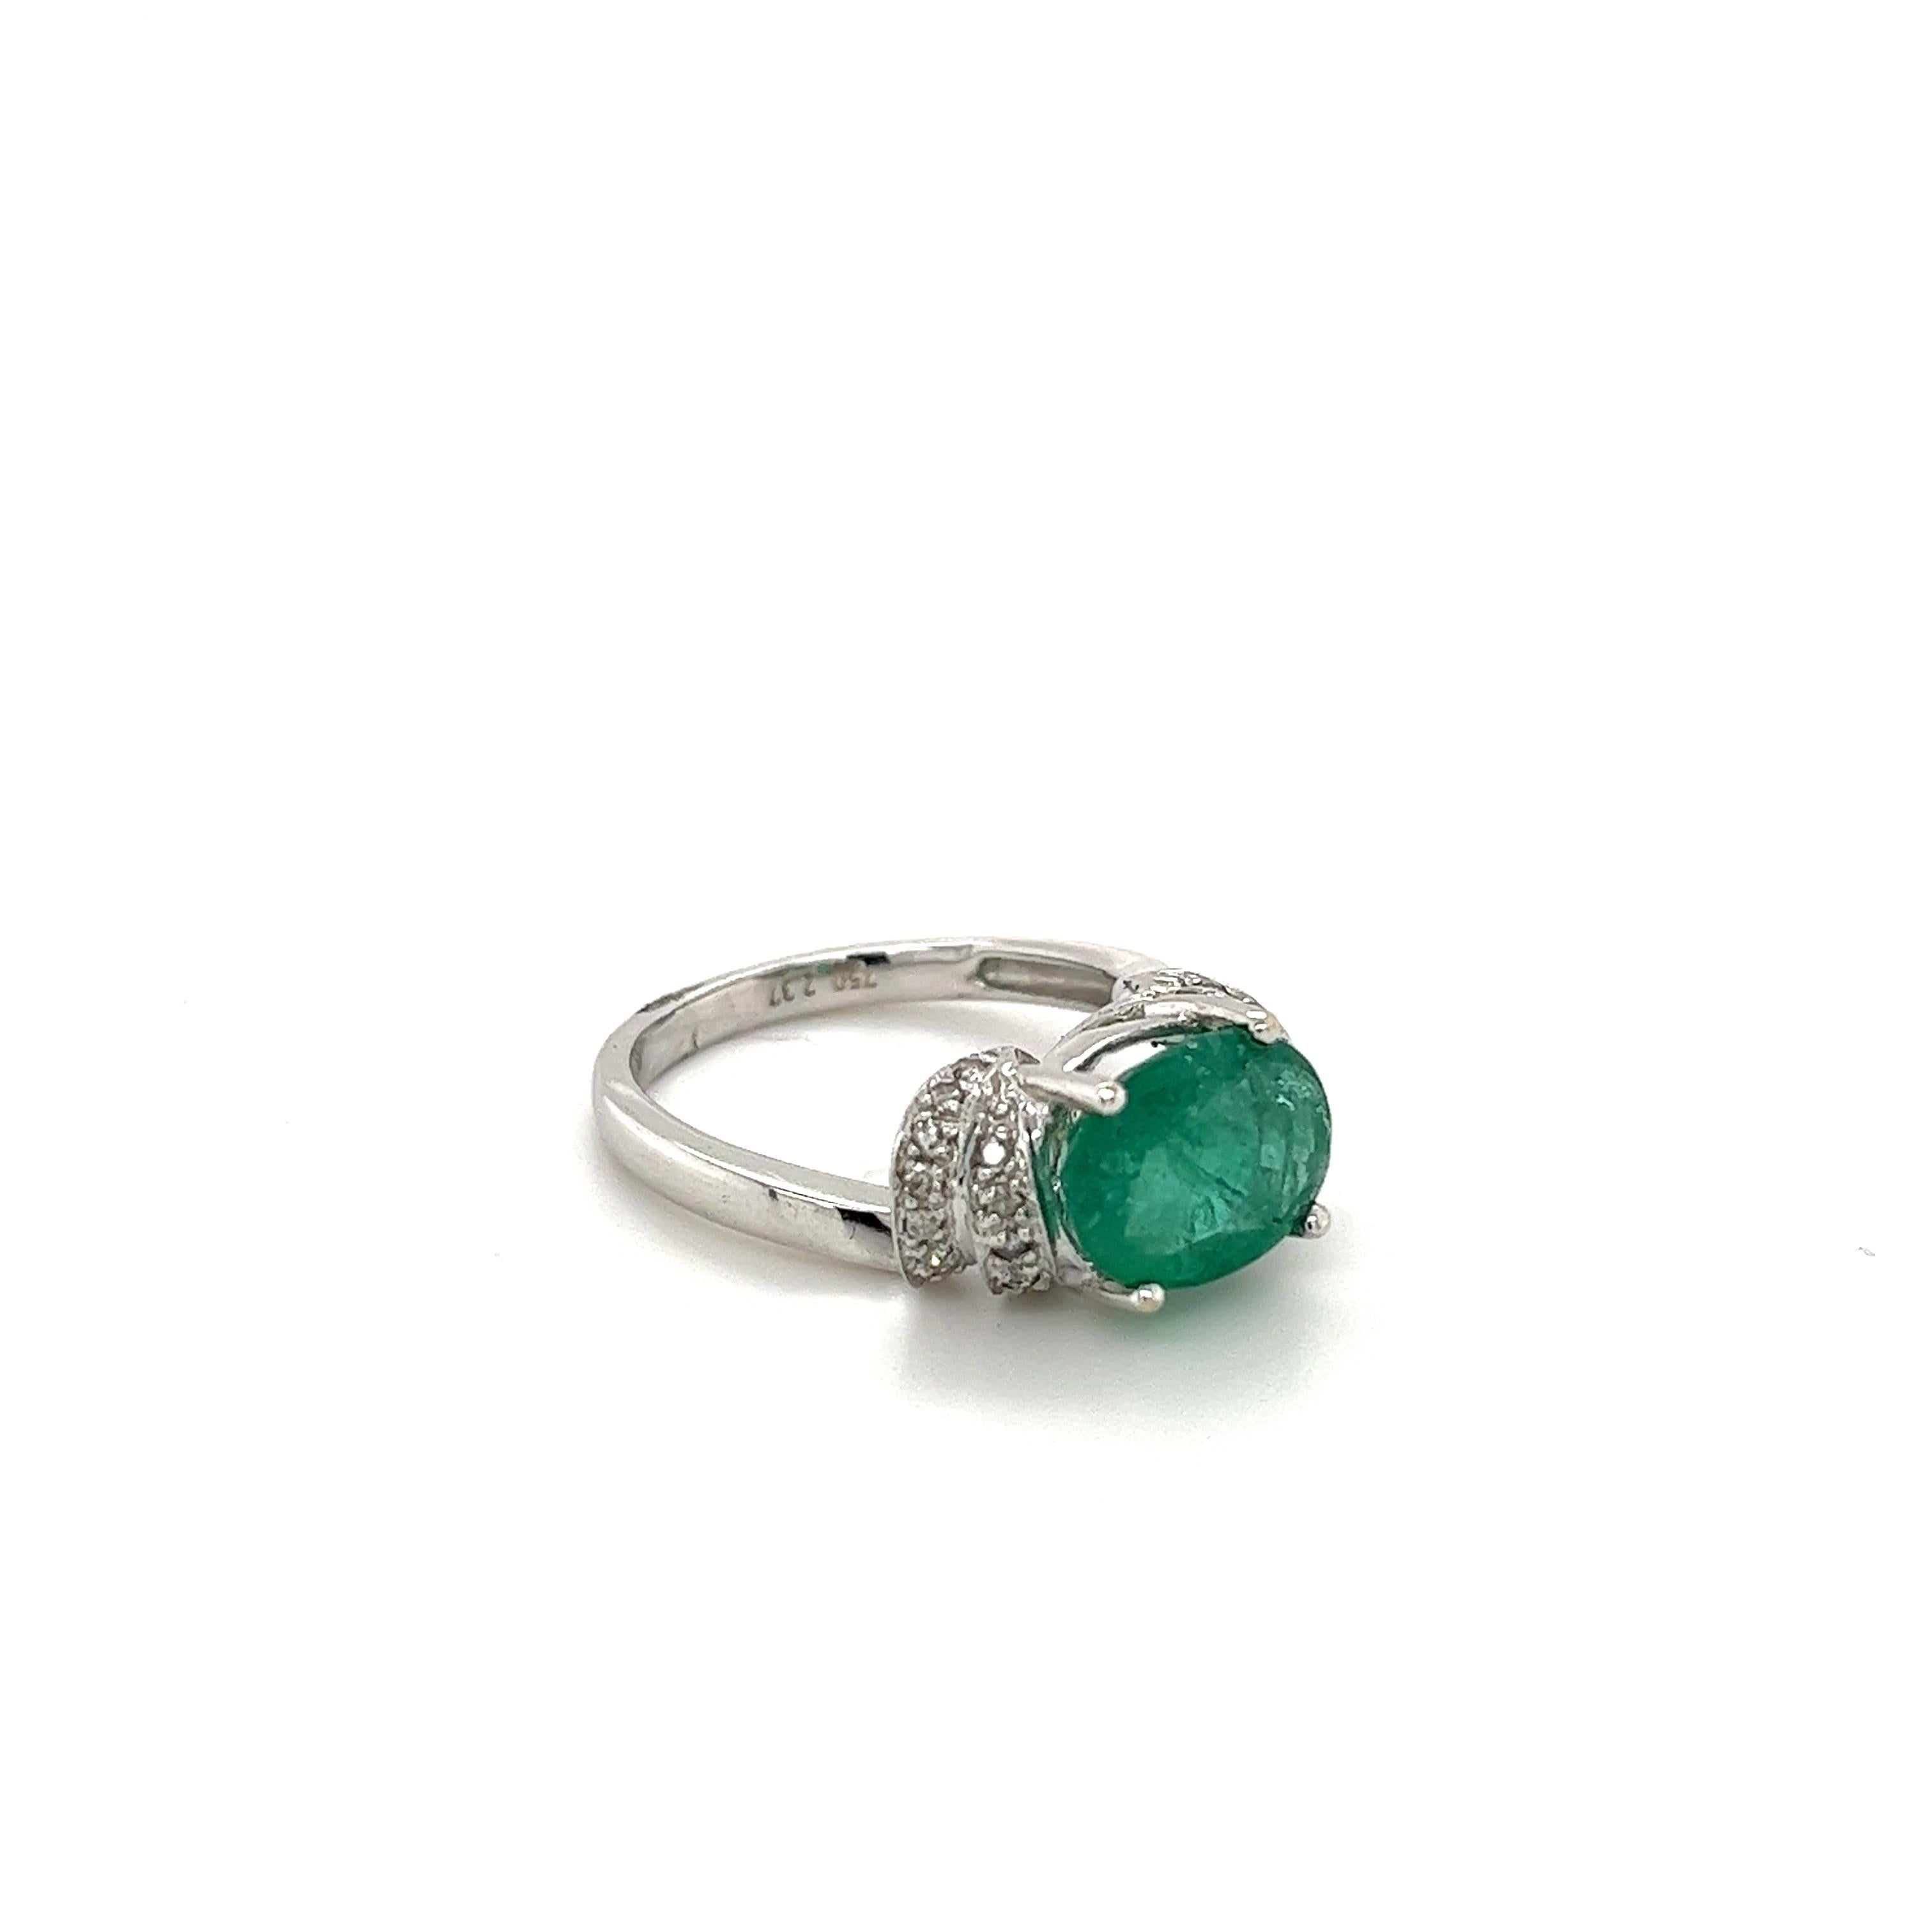 Lively Colombian Emerald ring mounted in 14k solid white gold. Oval cut natural emerald is prong set and adorned with 0.24 carats in colorless natural diamonds. This Emerald has a deep light green color hue, with excellent luster and translucence.